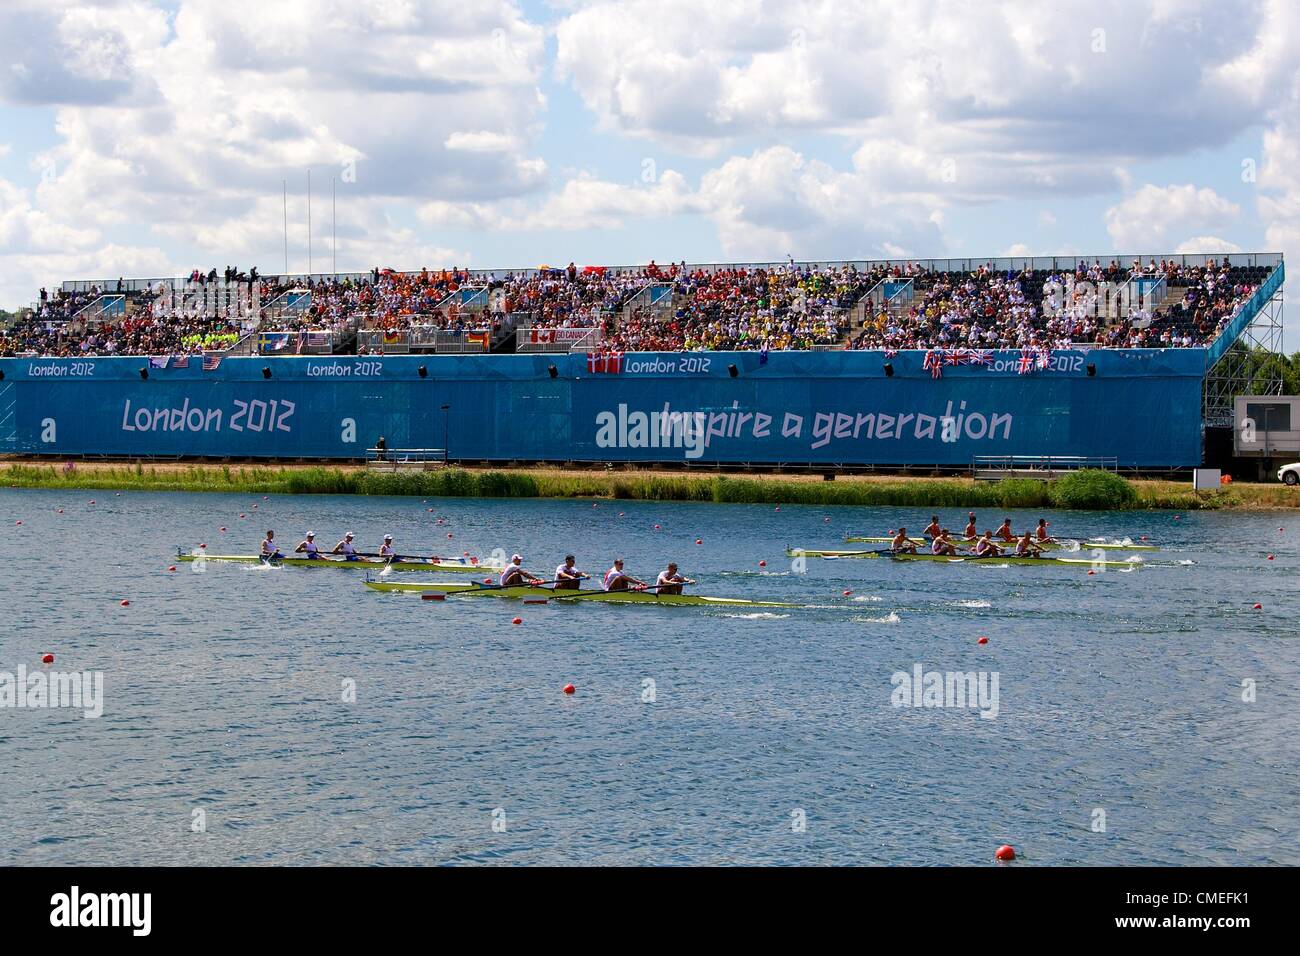 28.07.2012 Dorney Lake, England. General Views from day 1 of the Olympic Regatta. Stock Photo